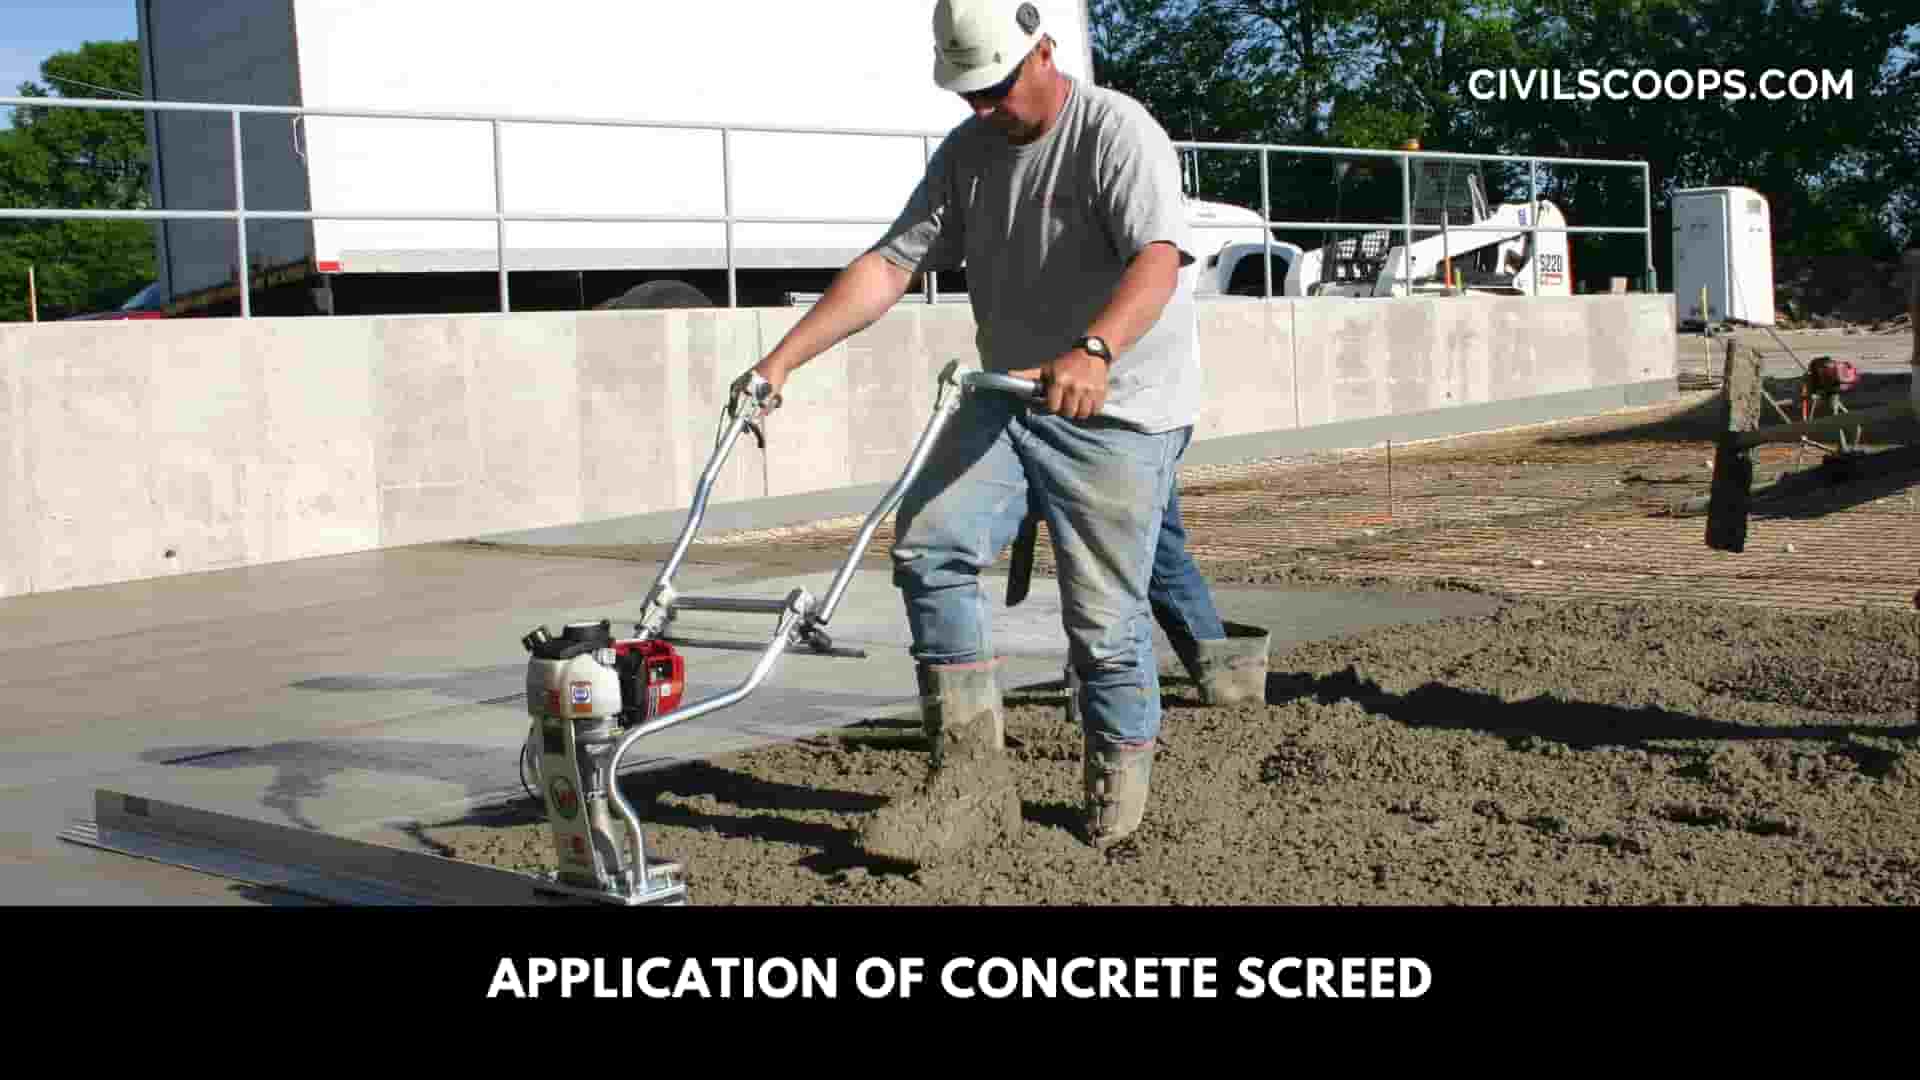 Application of Concrete Screed